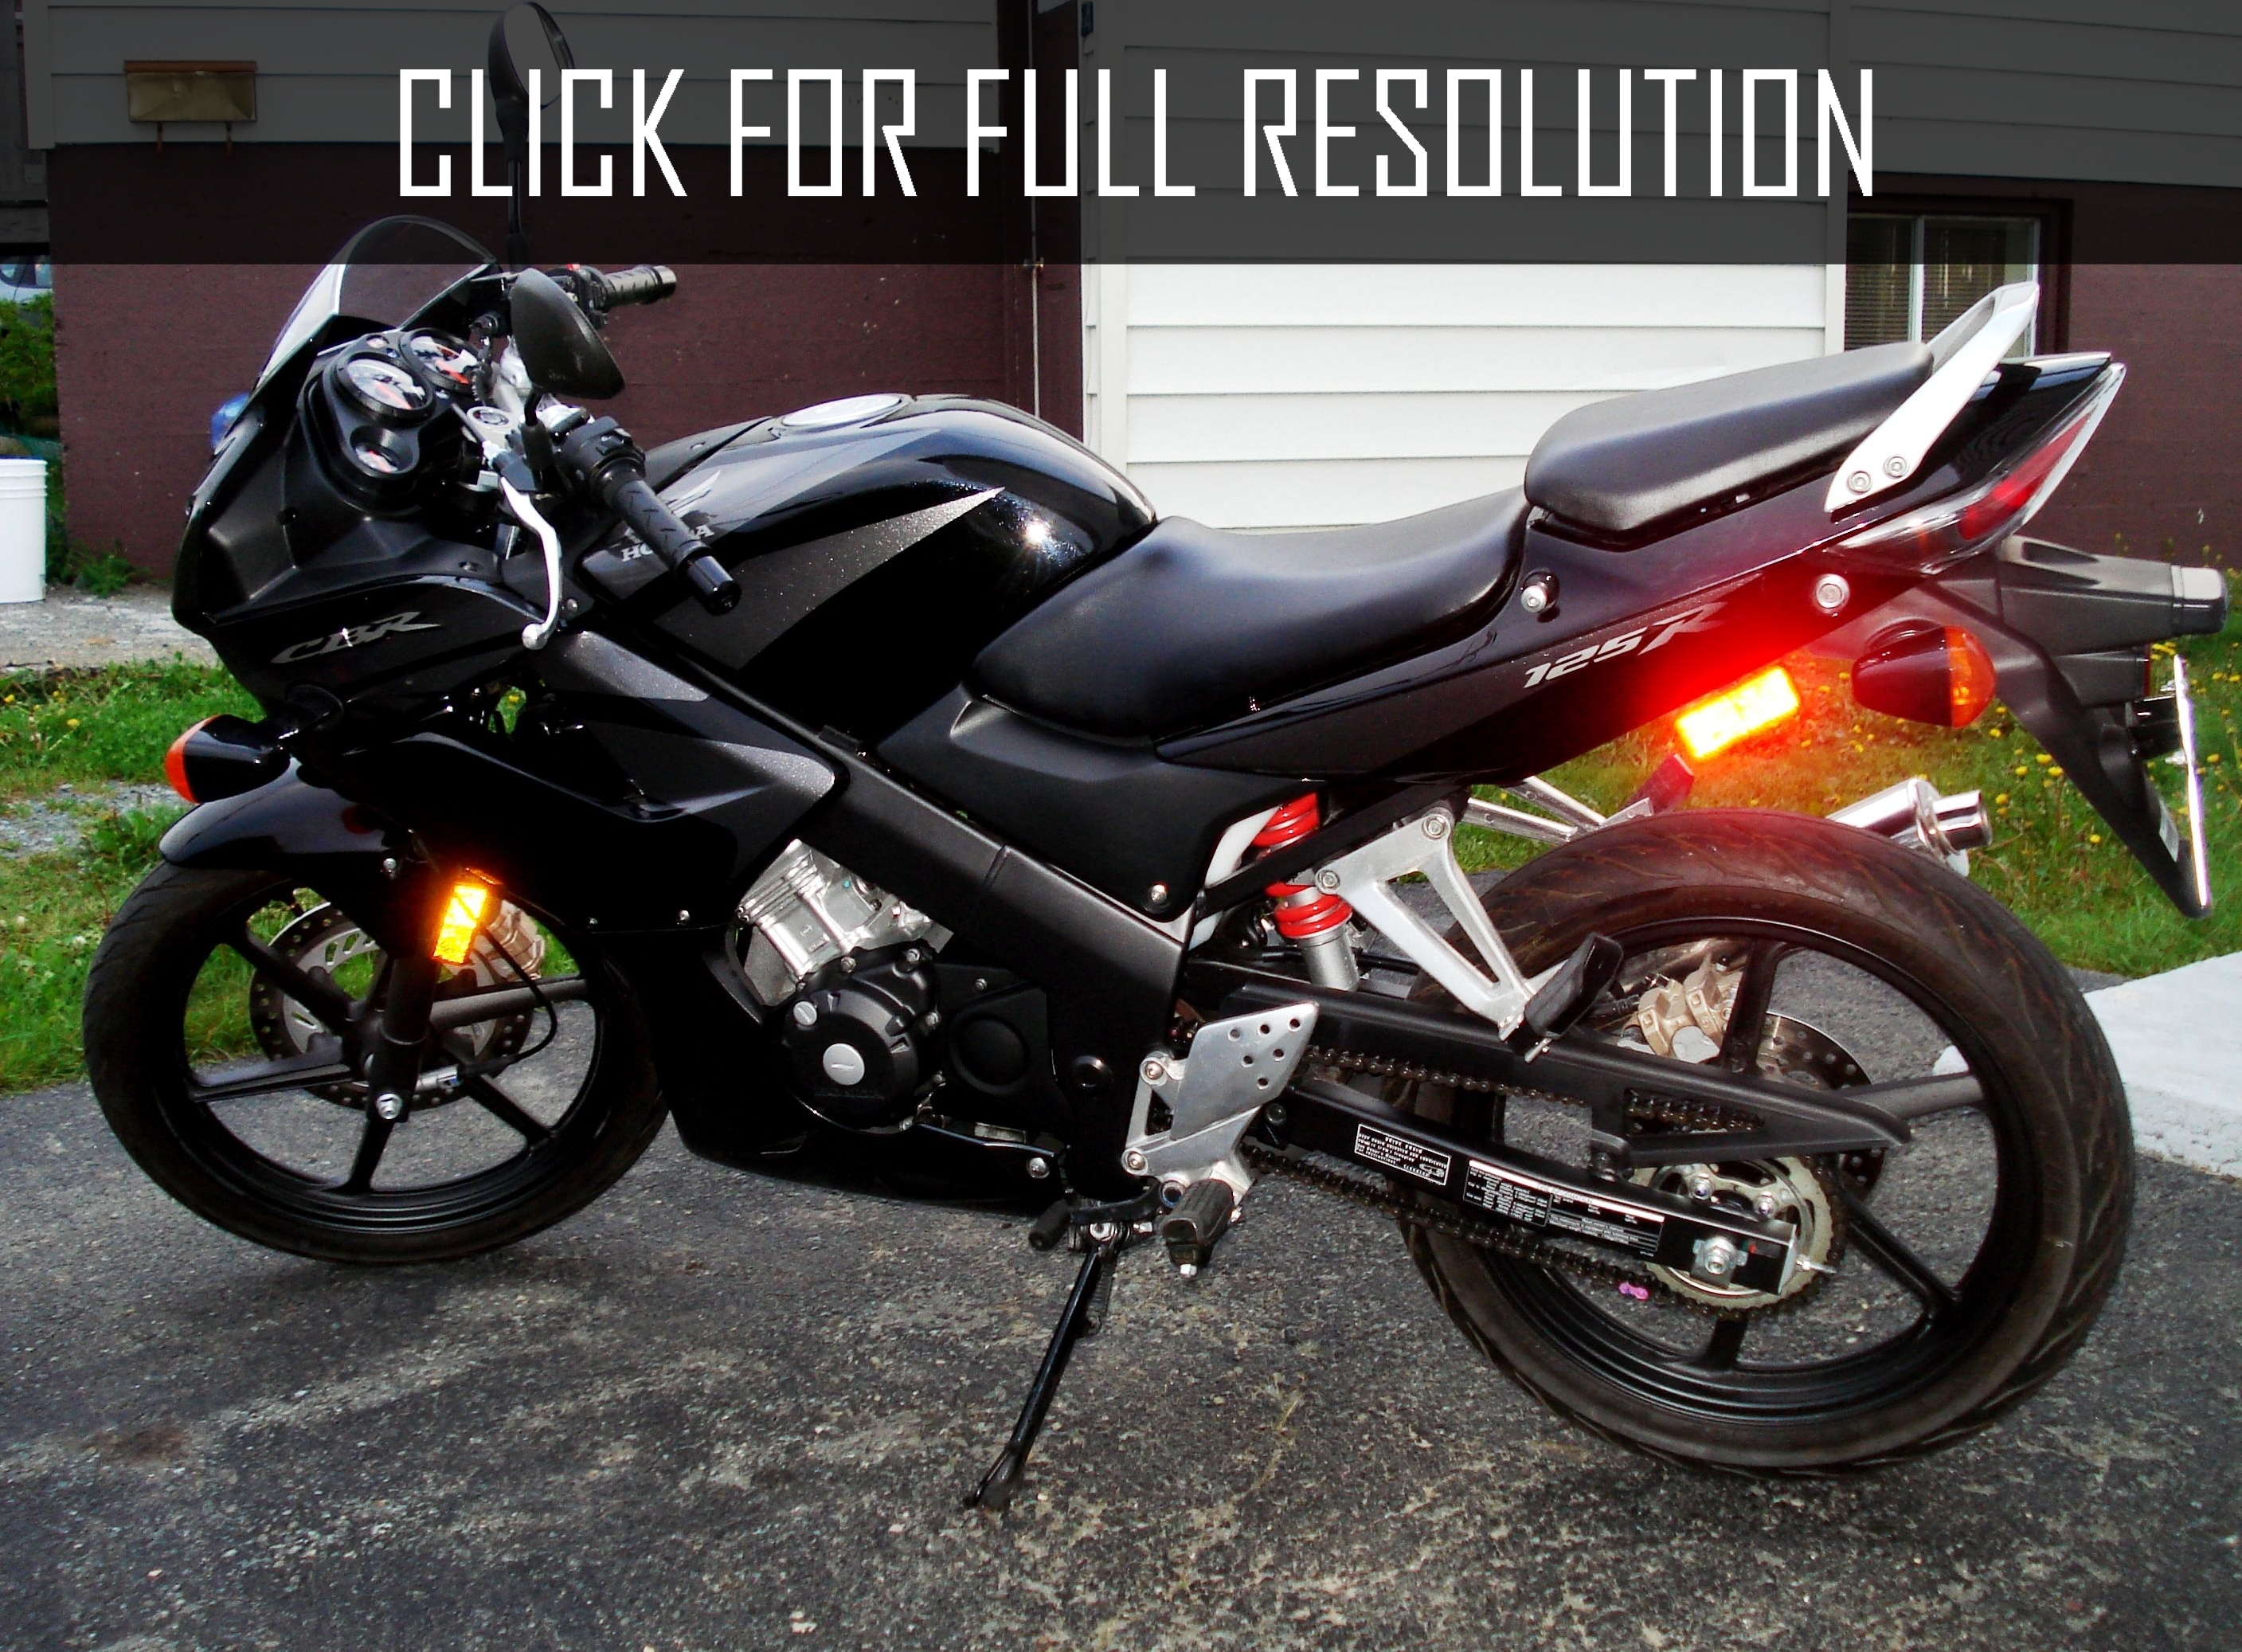 2008 Honda Cbr 125 news, reviews, msrp, ratings with